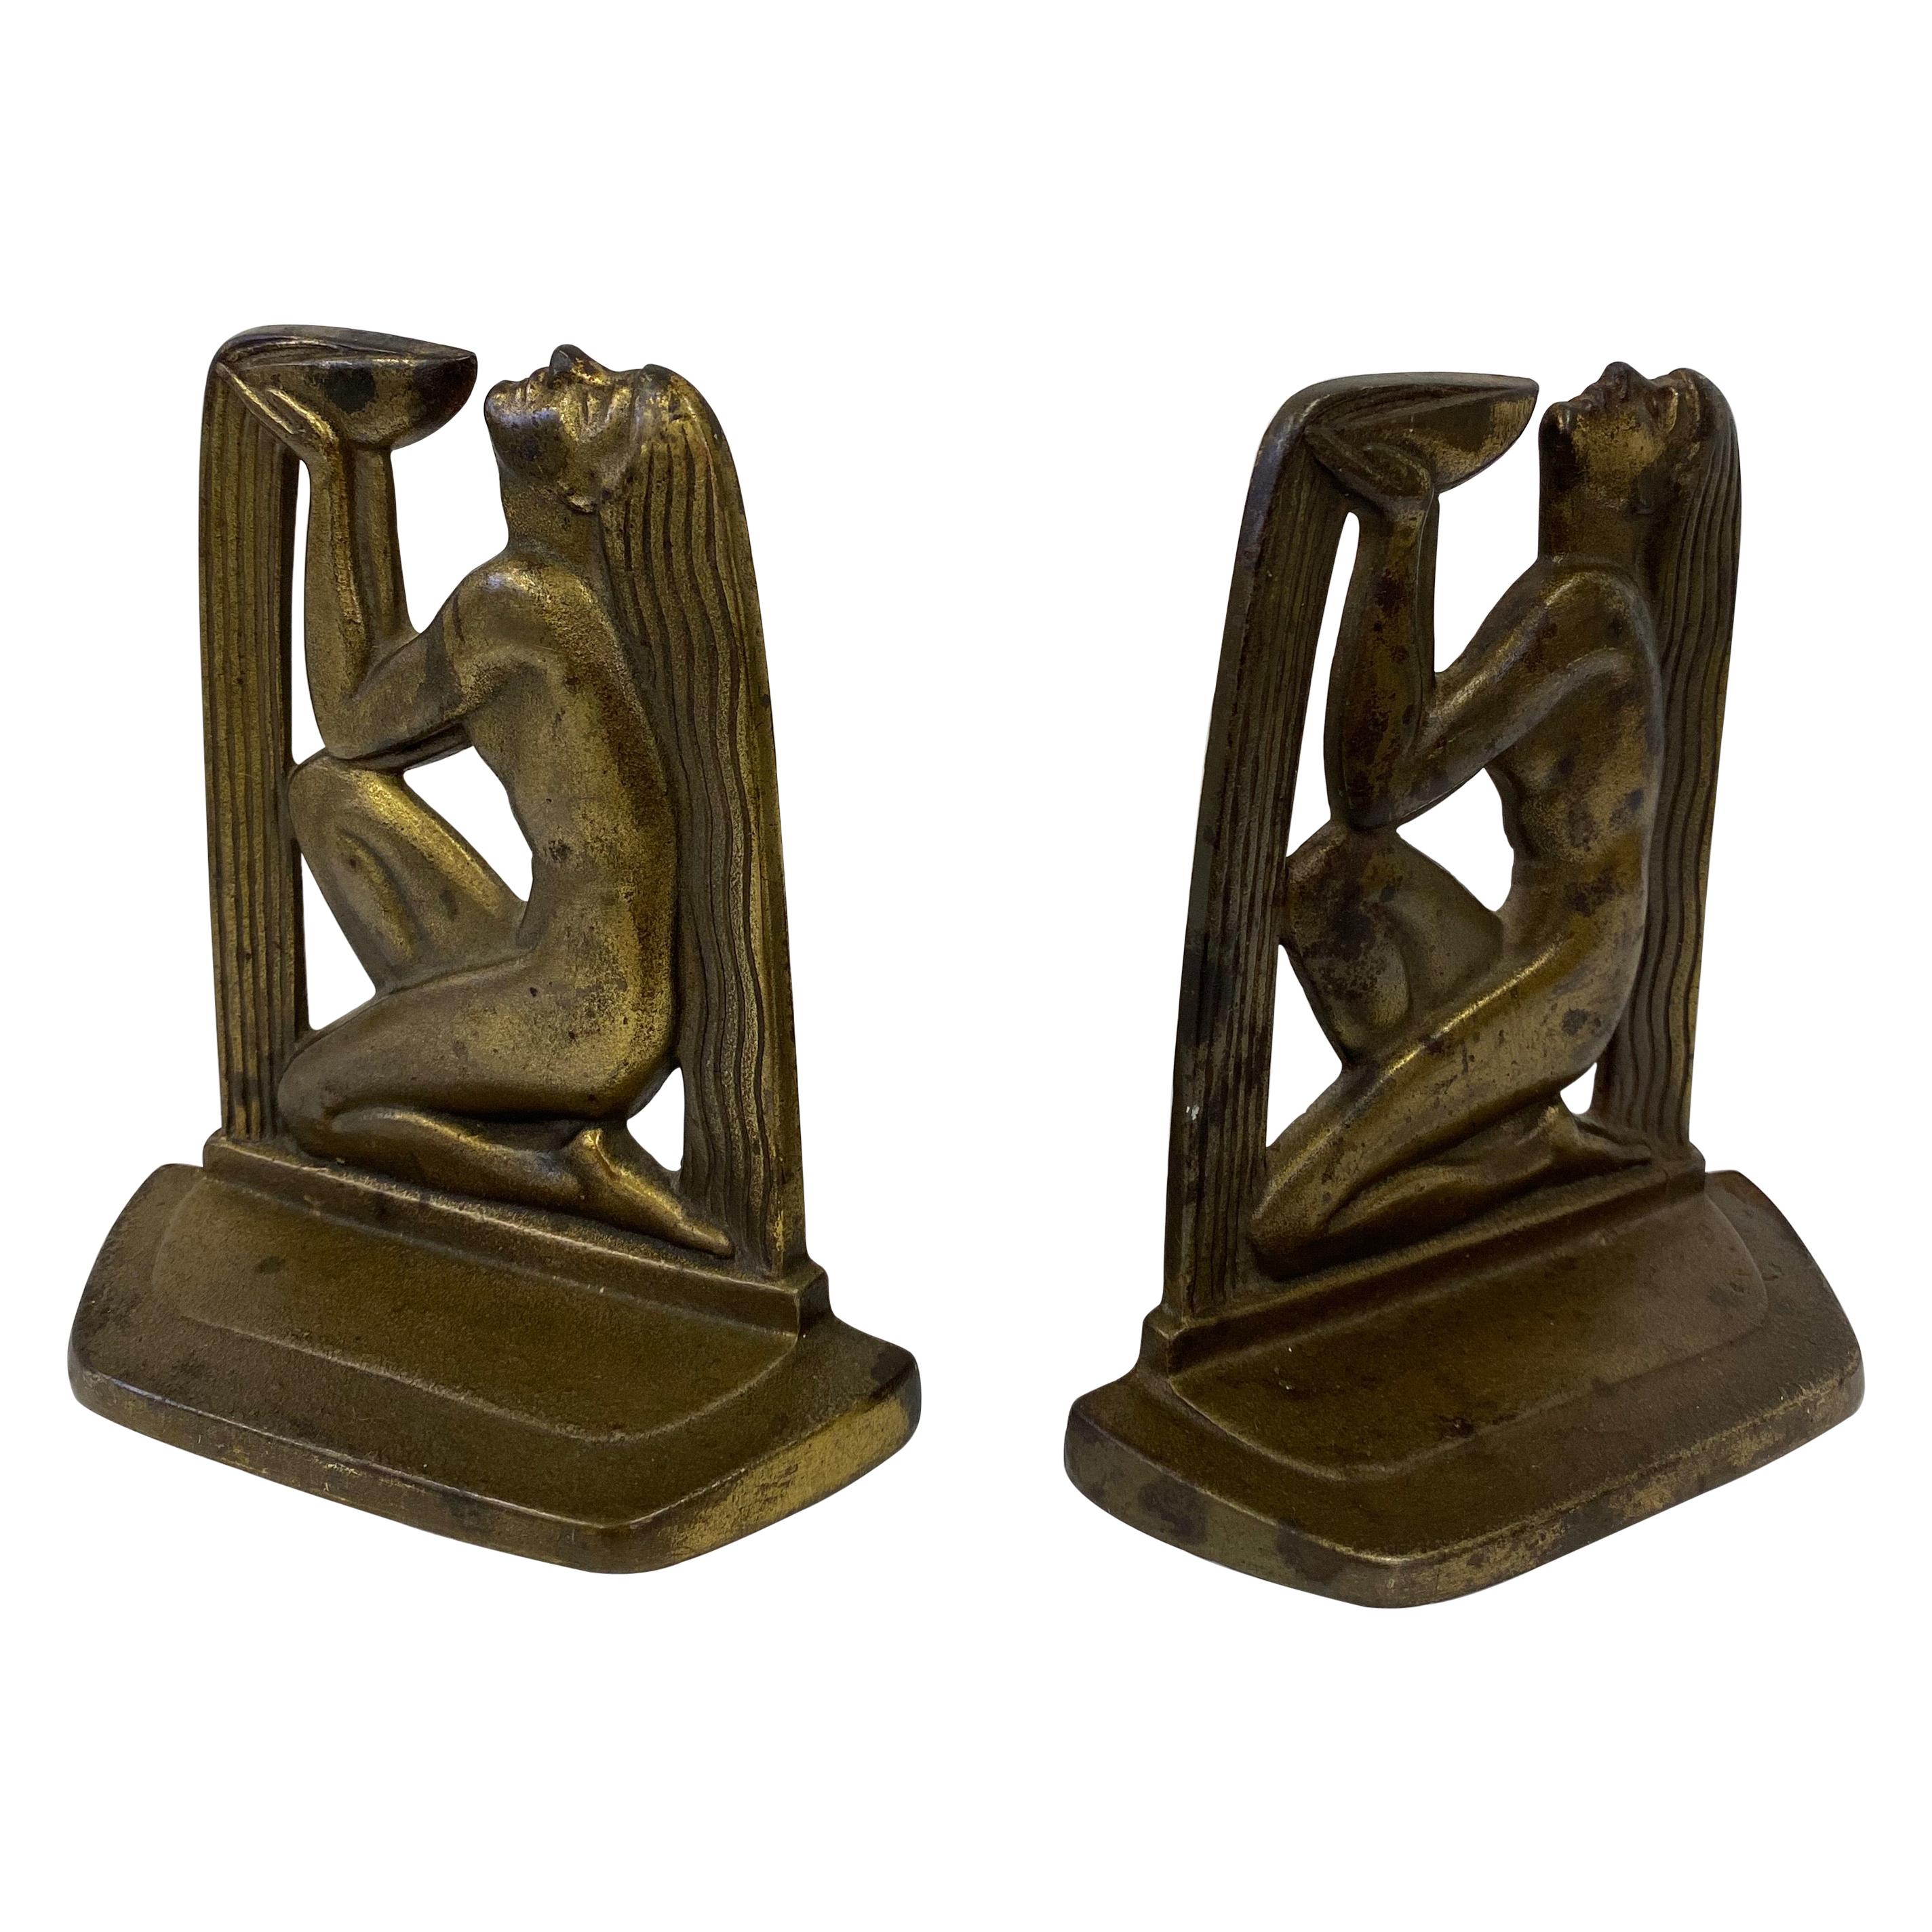 The Well of Wisdom Iron Bookends